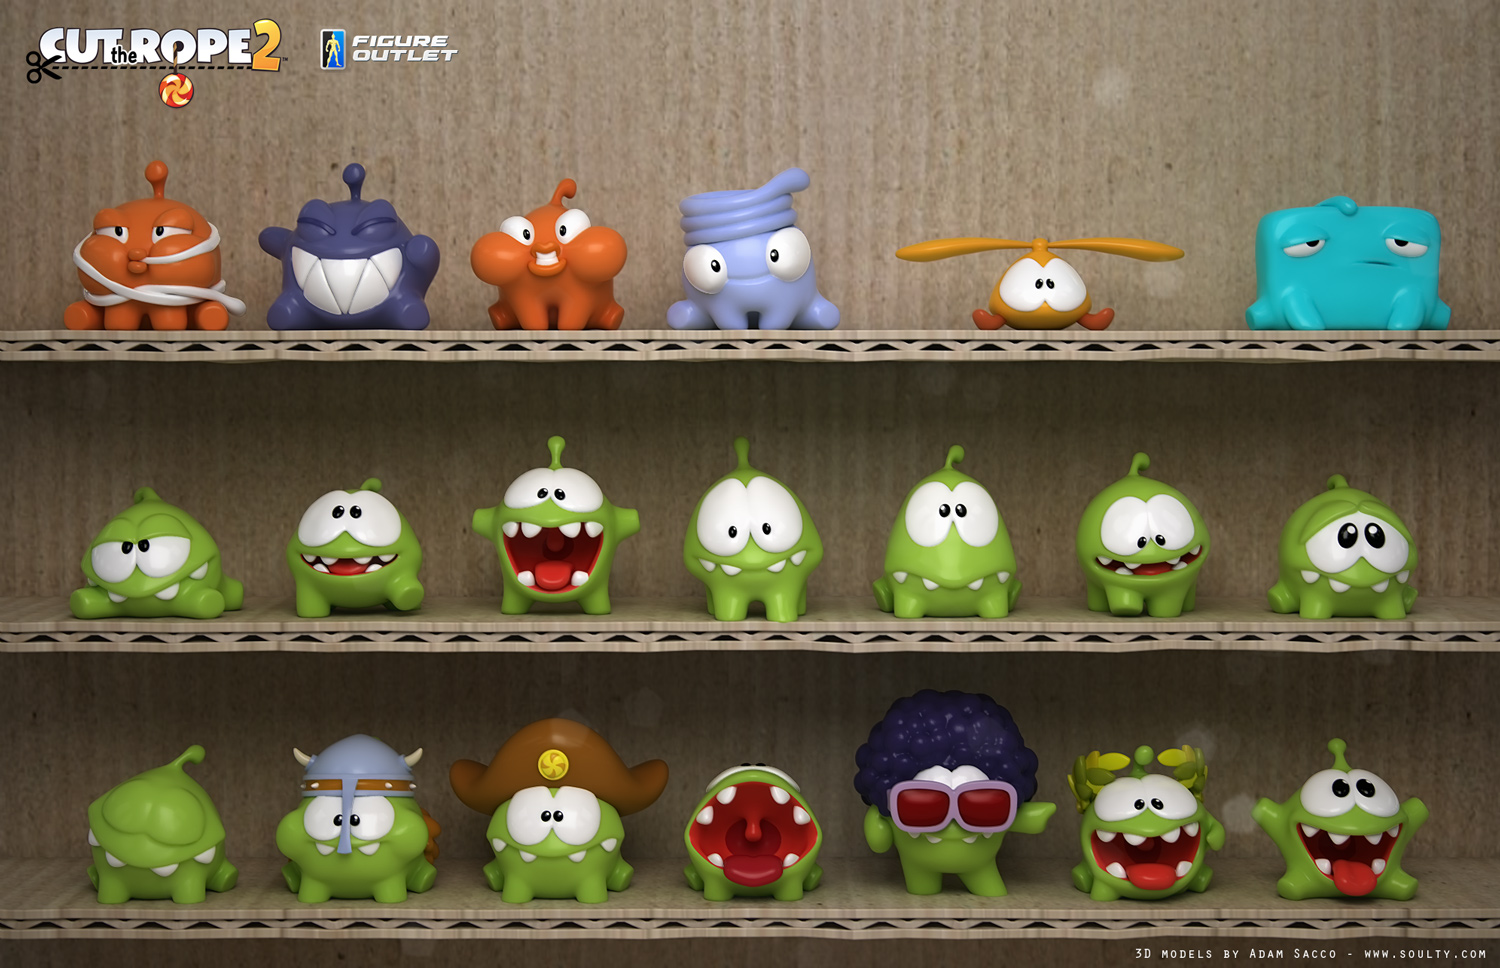 Cut the Rope 2 - Figure Outlet - Mobile application - ZBrushCentral